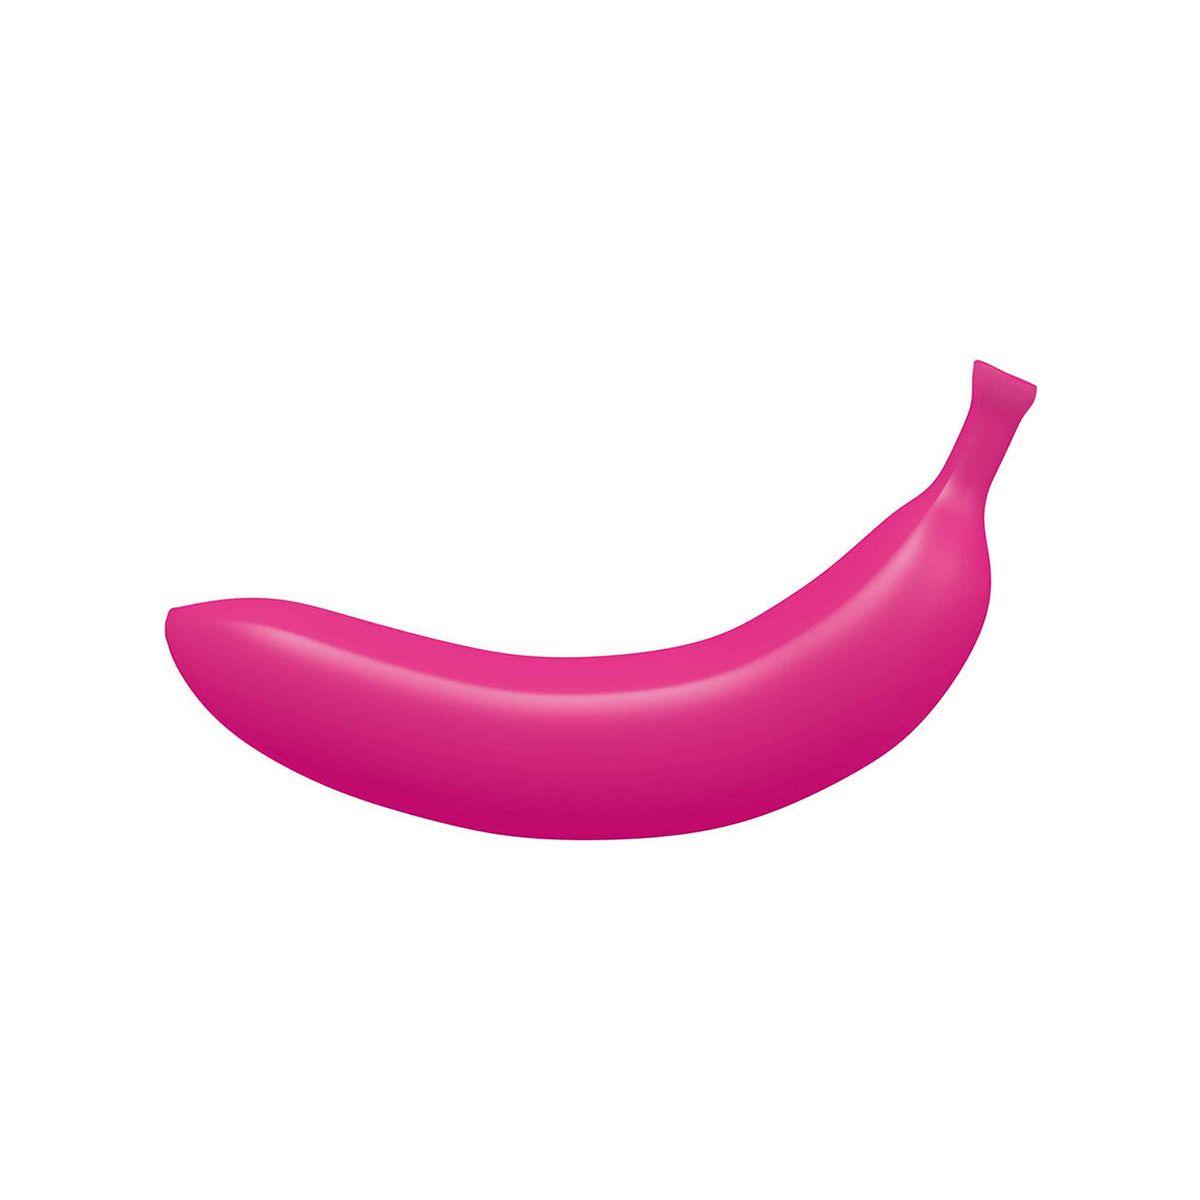 Oh Oui Banana by Love to Love - Danger Pink - shop enby